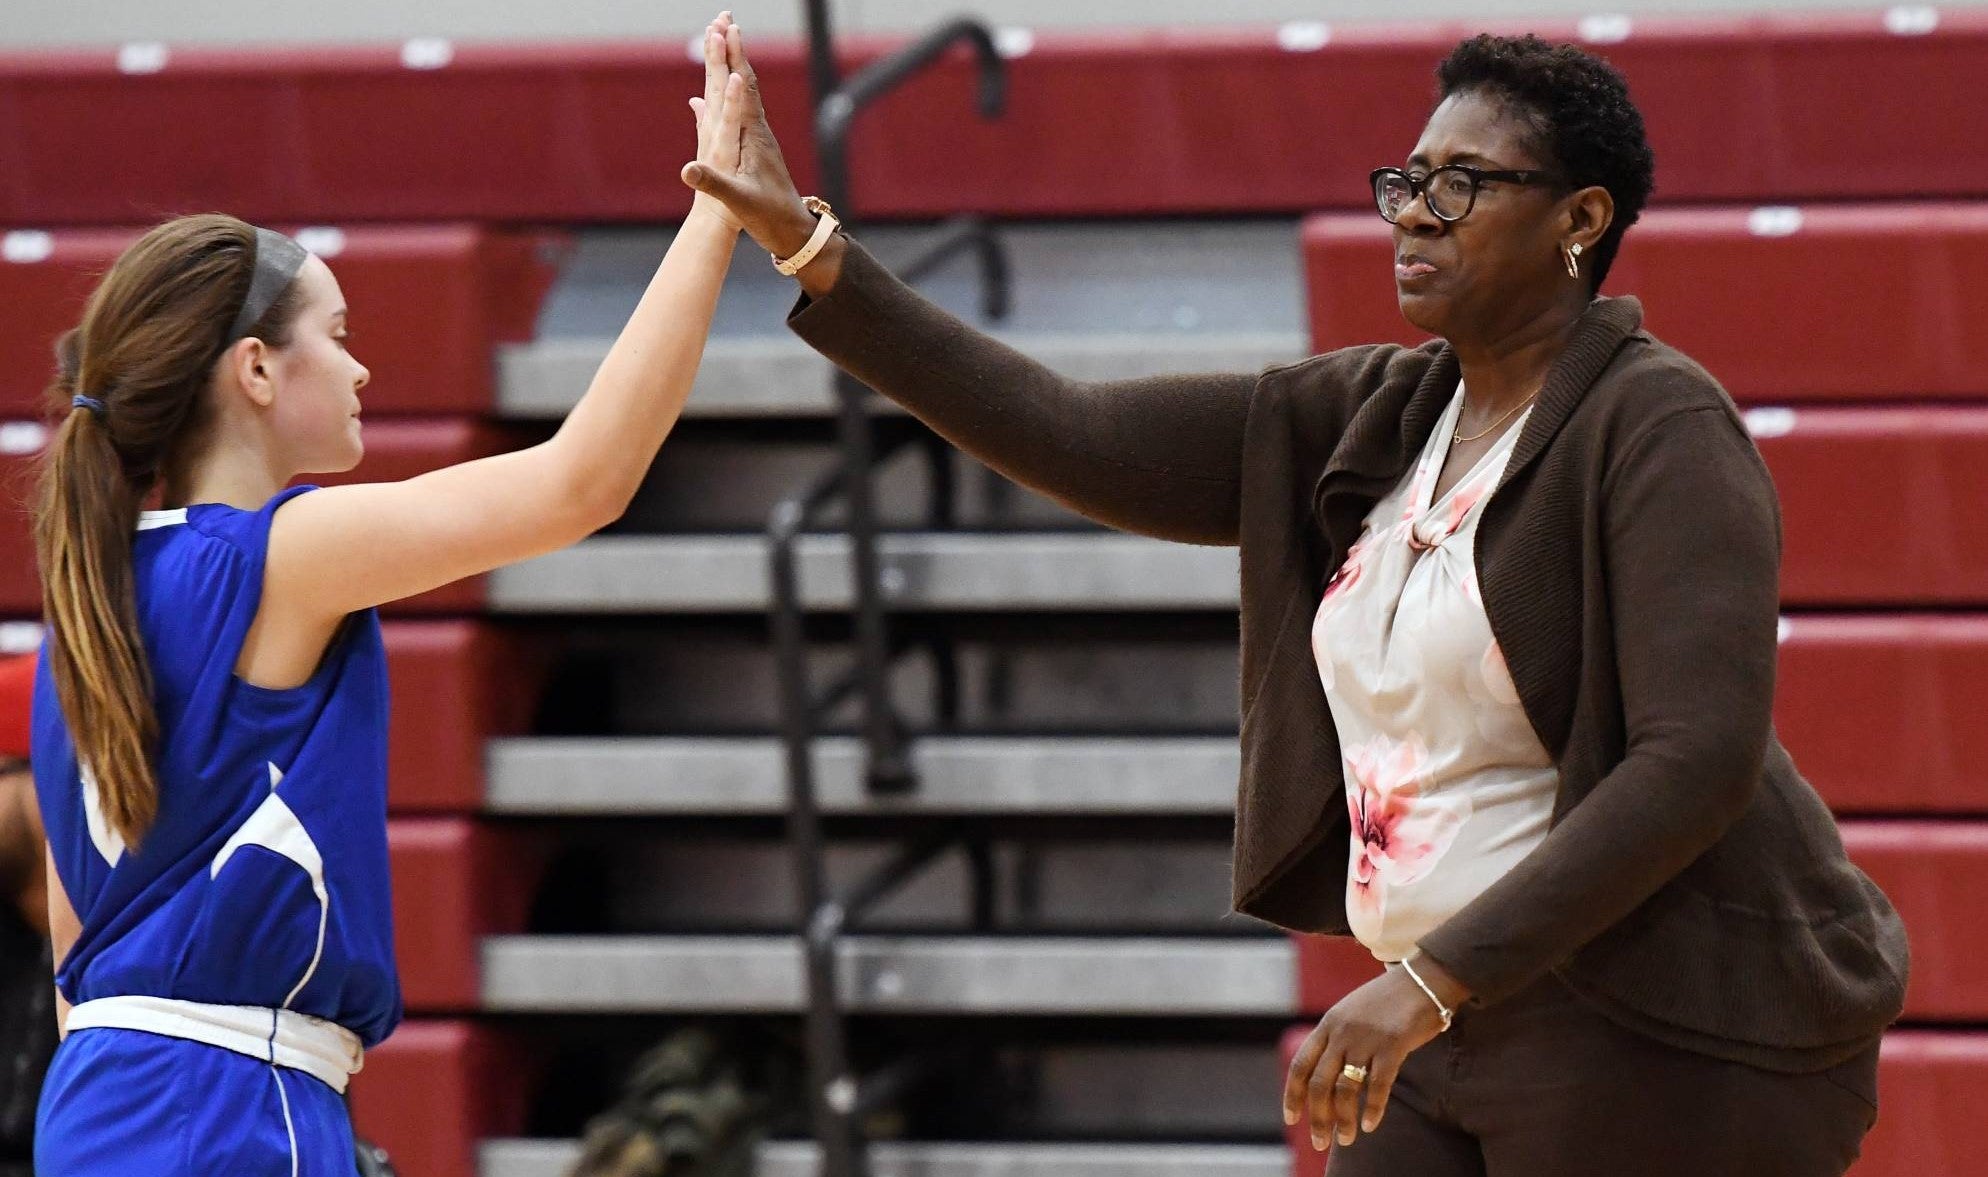 Women's Basketball photo of coach high-fiving player